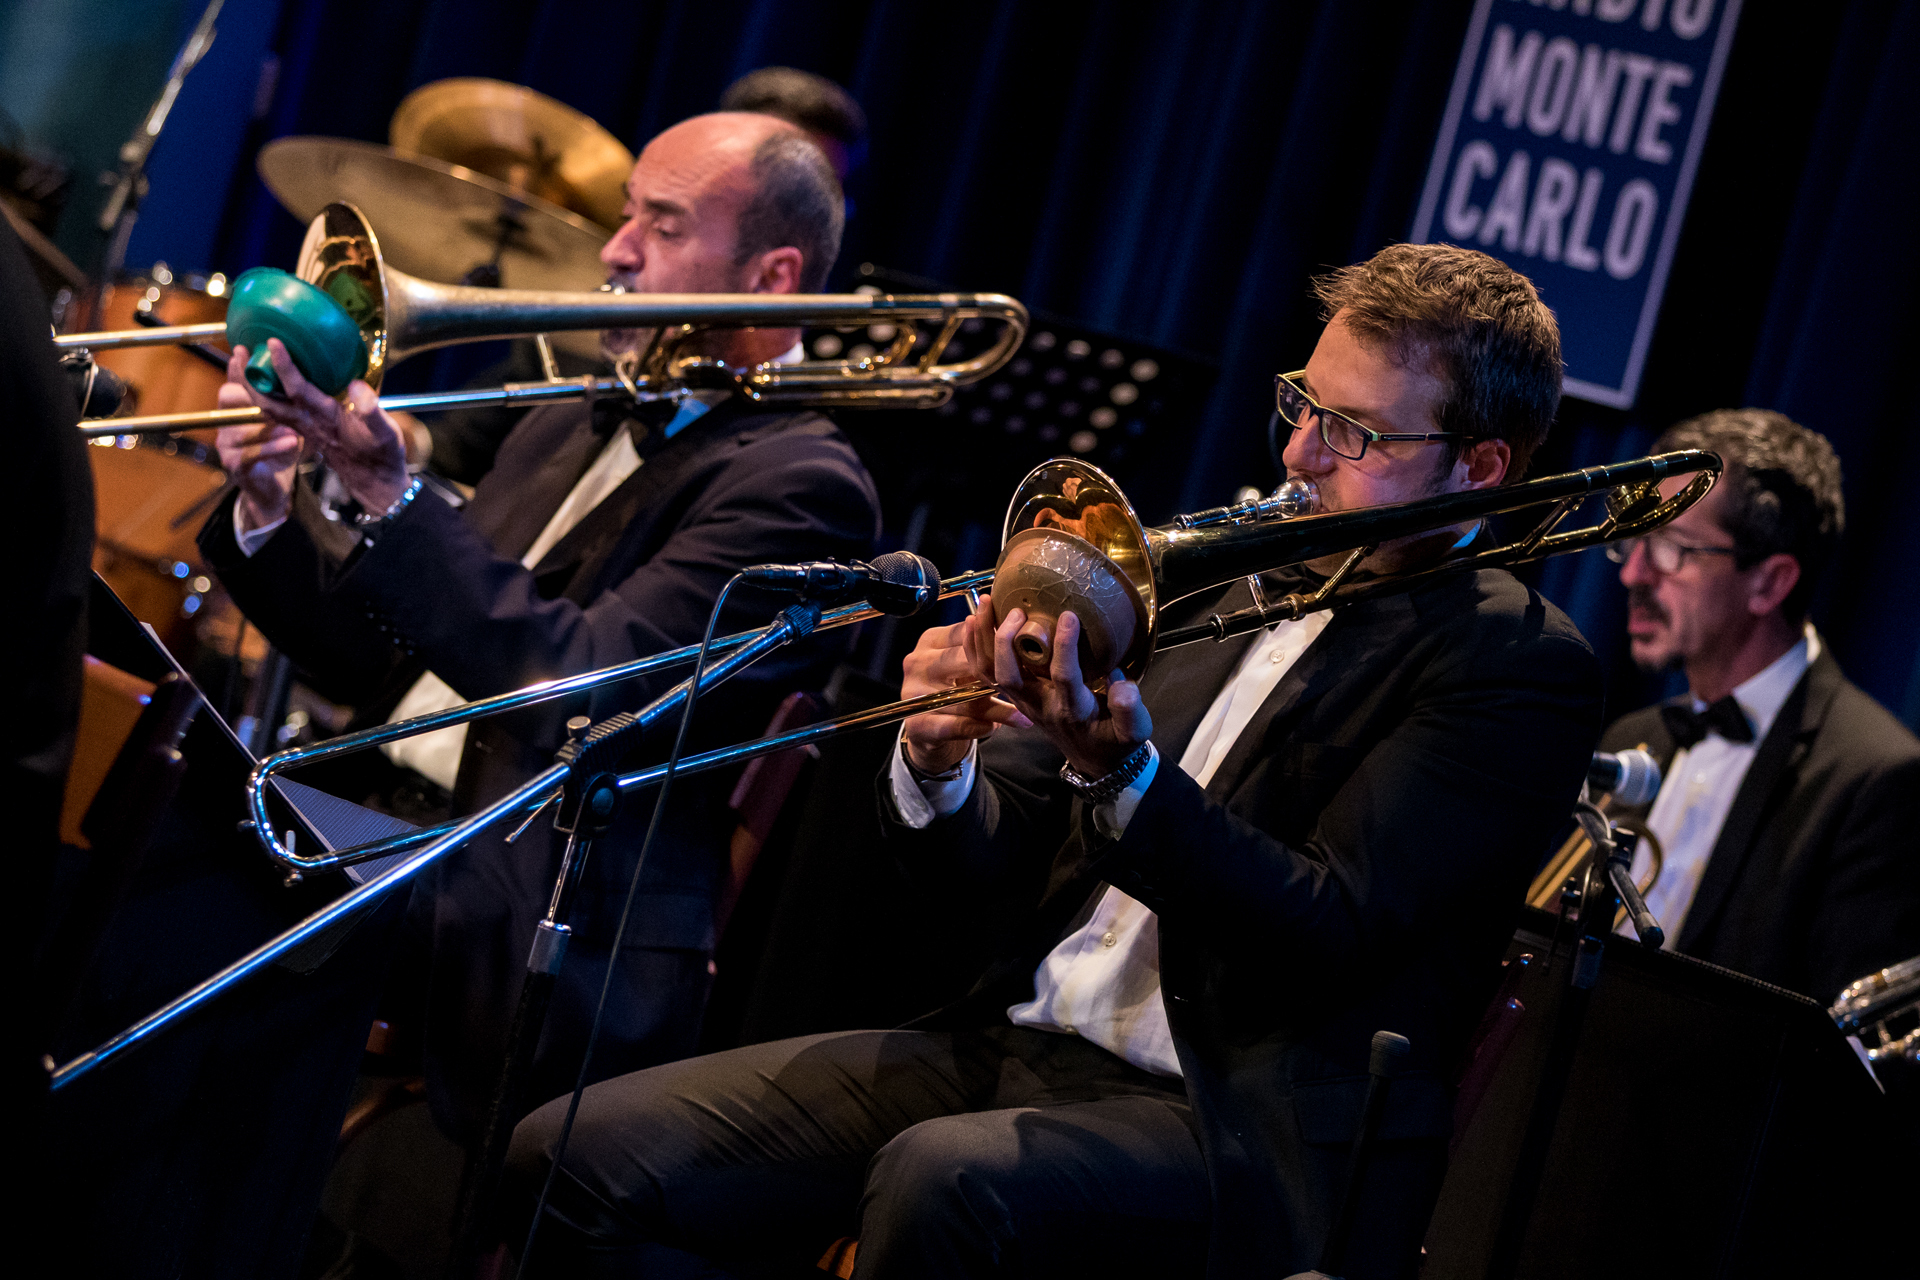 2016_10_15_Nick_Orchestra_Blue_Note_213954_7D2_8111